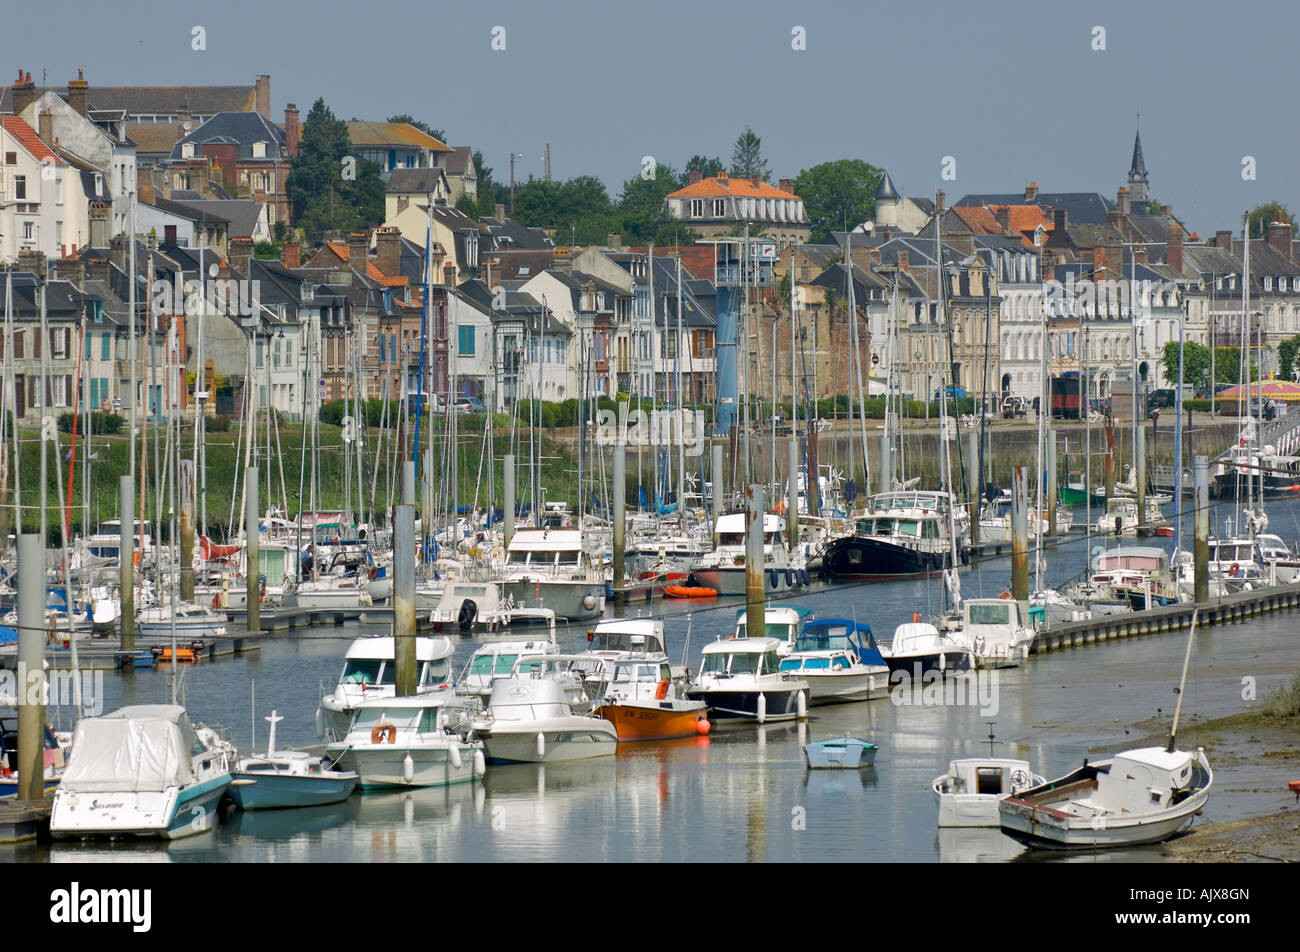 Boote bei Saint-Valery-Sur-Somme, Picardie, Frankreich Stockfoto